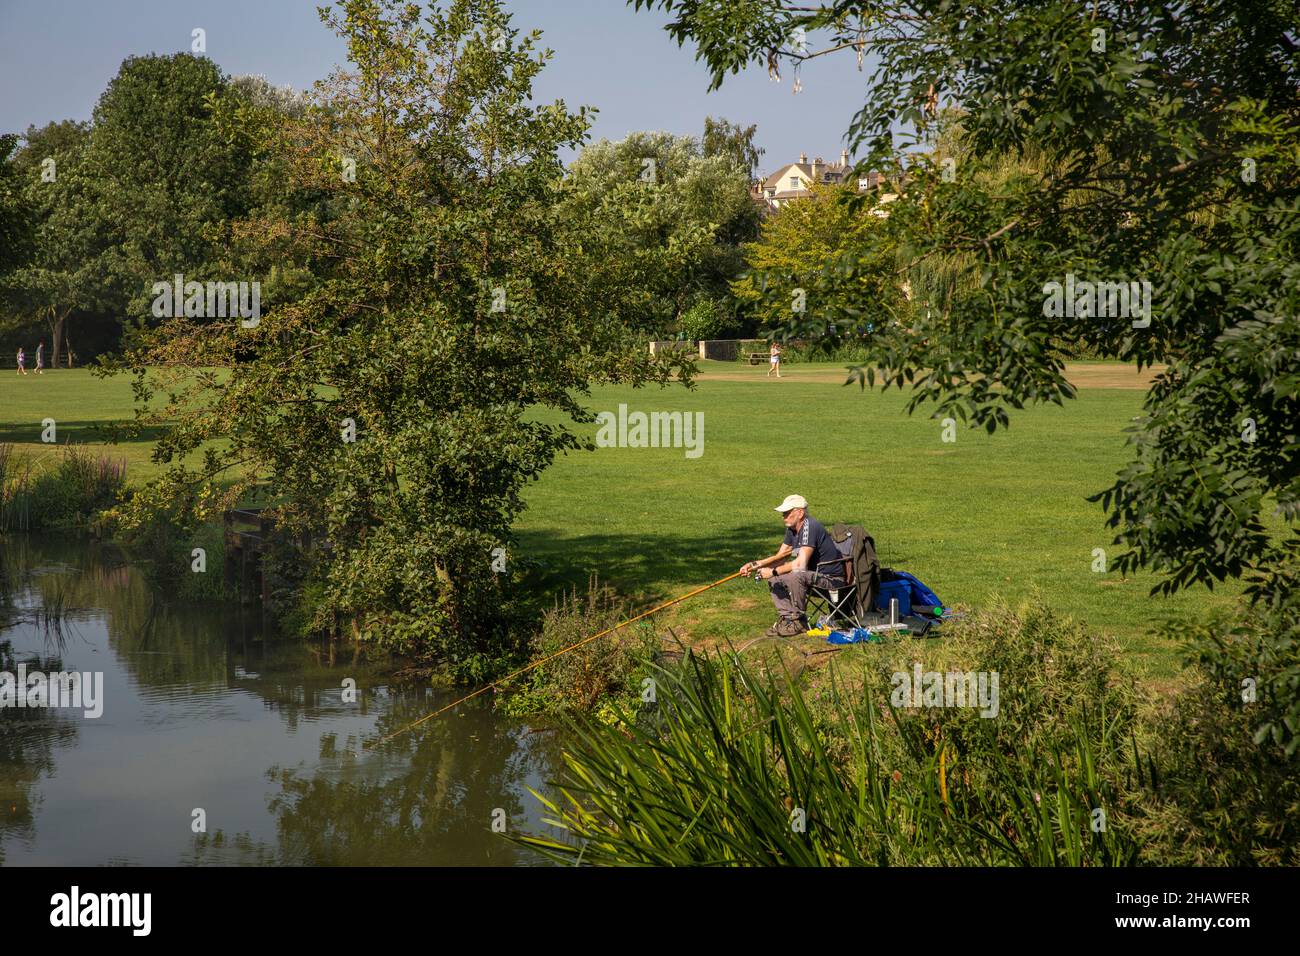 UK, England, Lincolnshire Stamford, Town Meadow, man fishing on River Welland Stock Photo